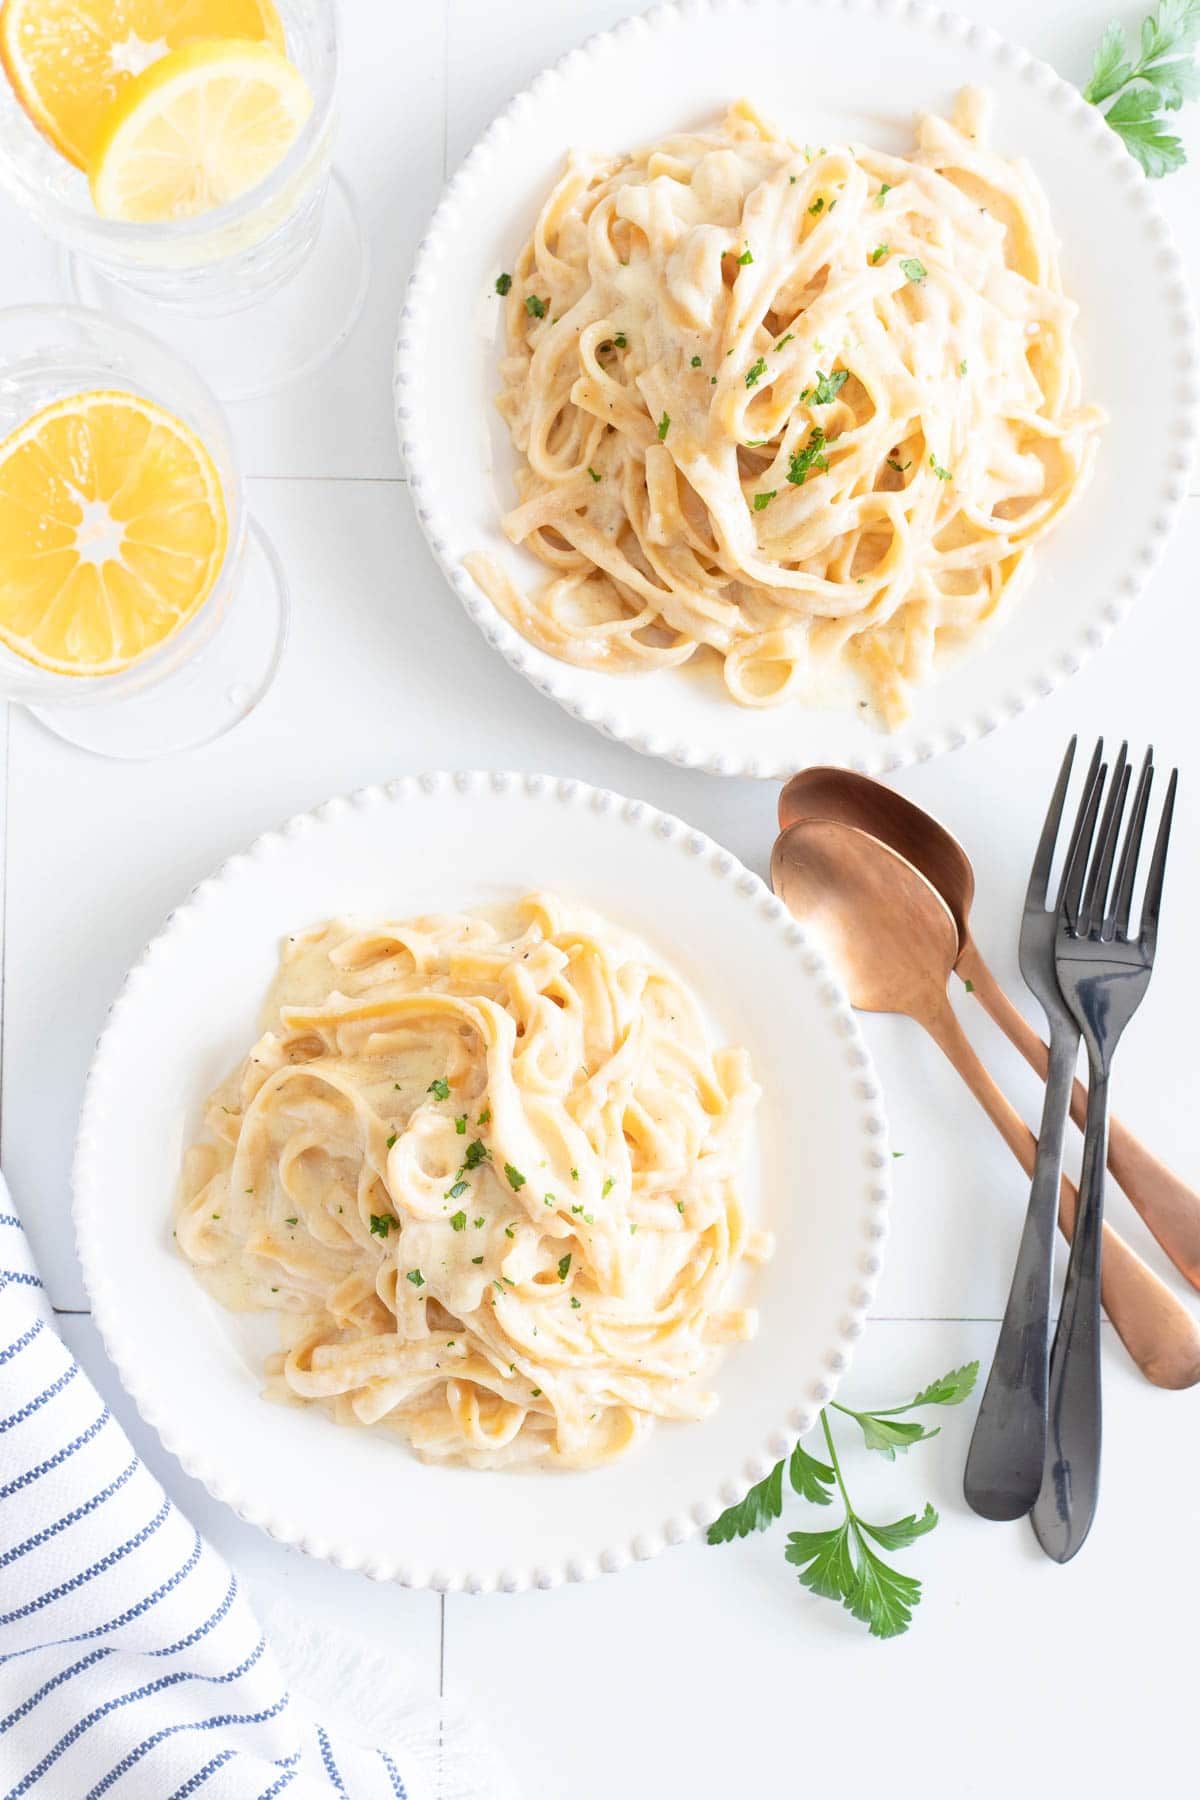 Two plates of Instant Pot fettuccine alfredo on a white plates with silverware and pieces of parsley